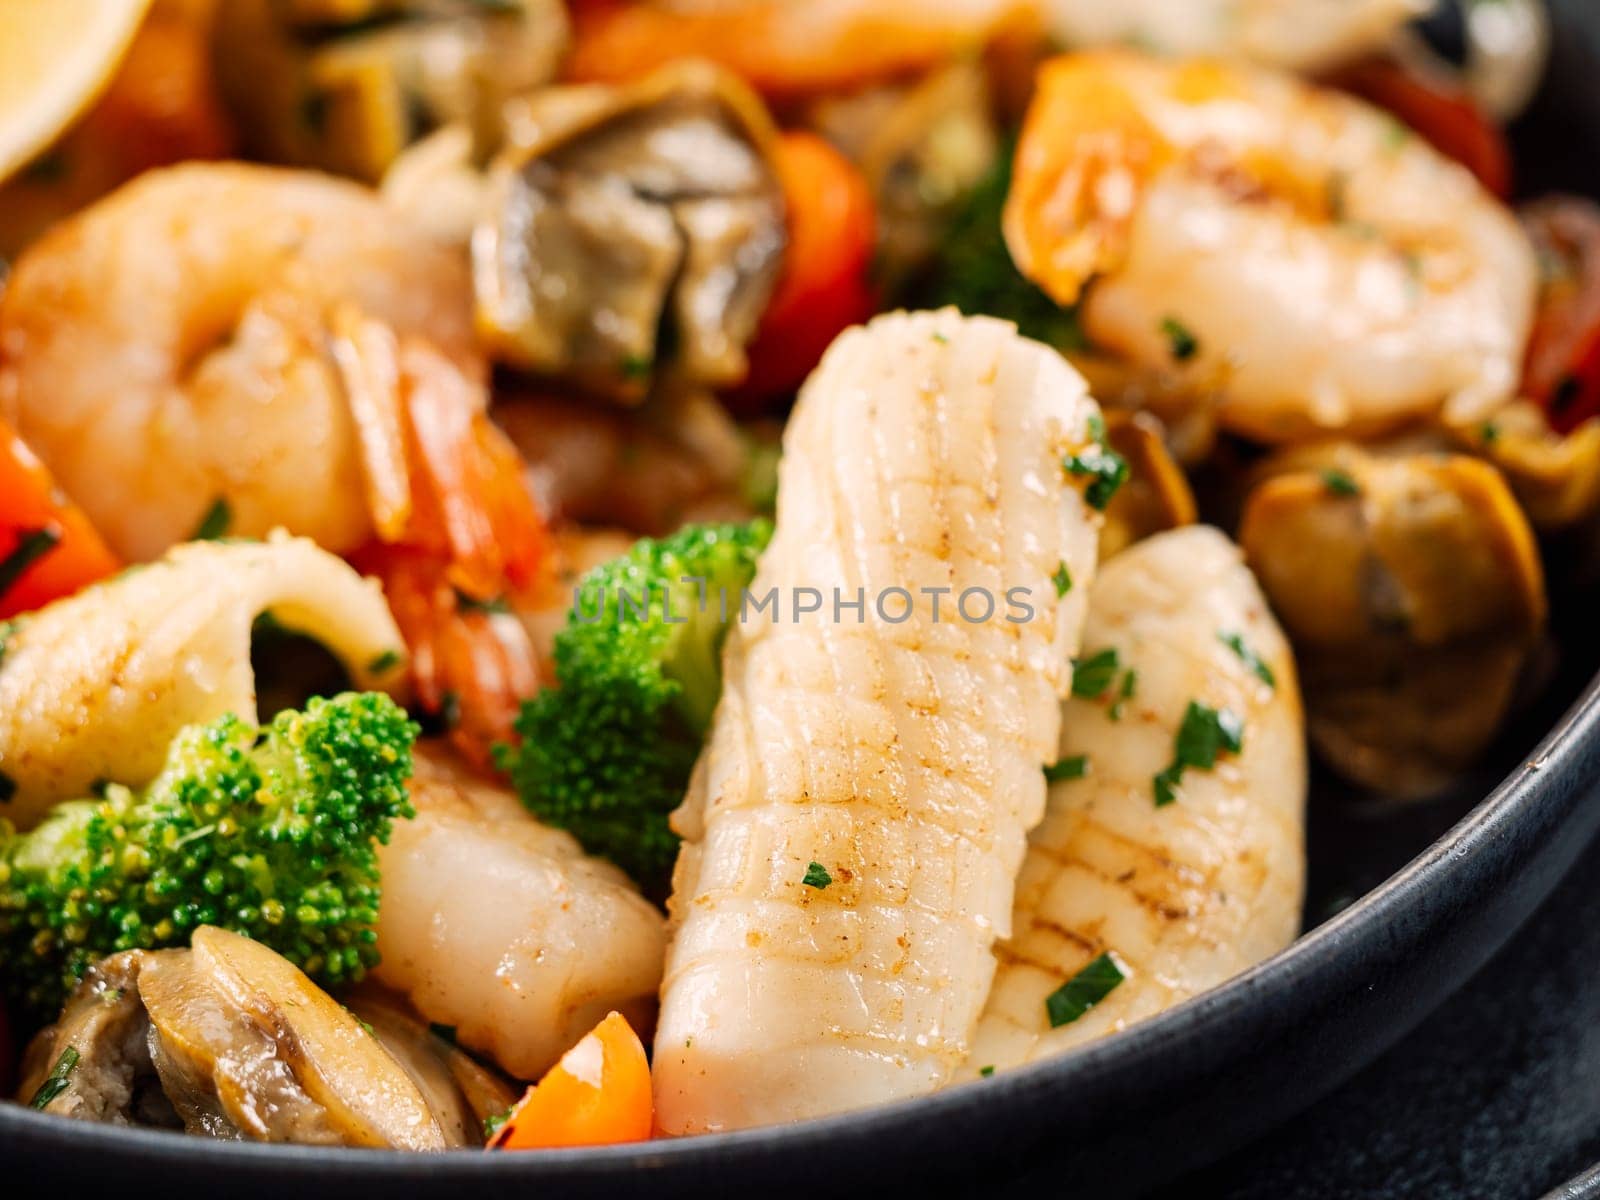 Salad with Mixed Seafood on dark plate by fascinadora